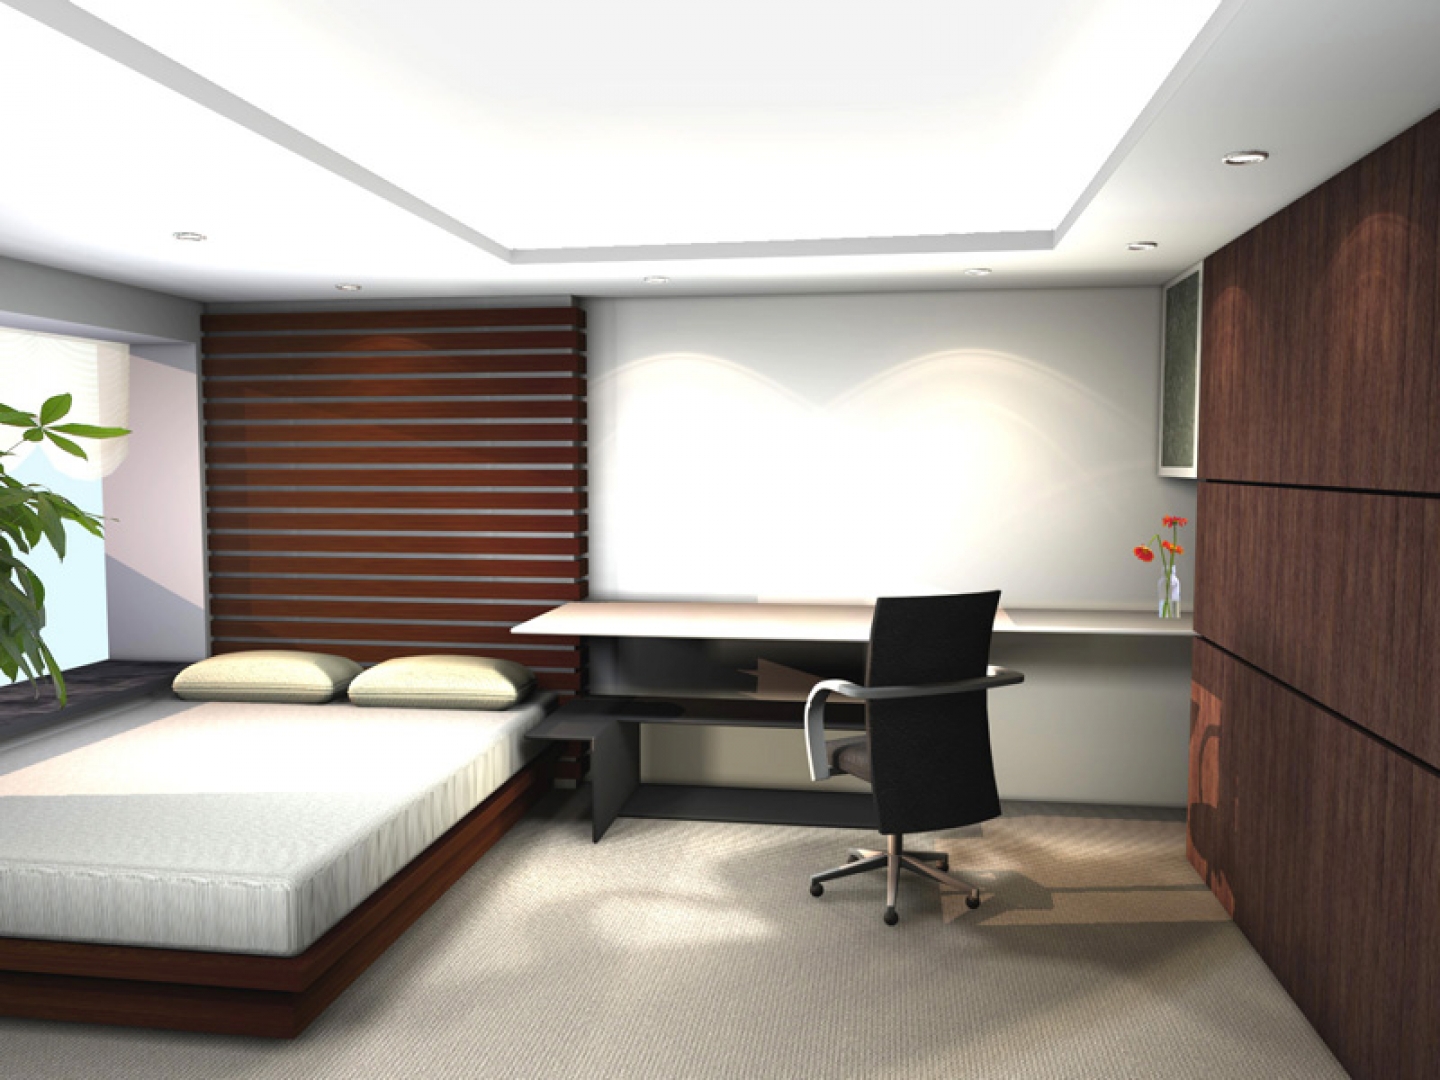 Bsblid50 Bedroom Small Bedroom Layout Interior Design Today 2020 08 18 Download Here,Different Letter Designs